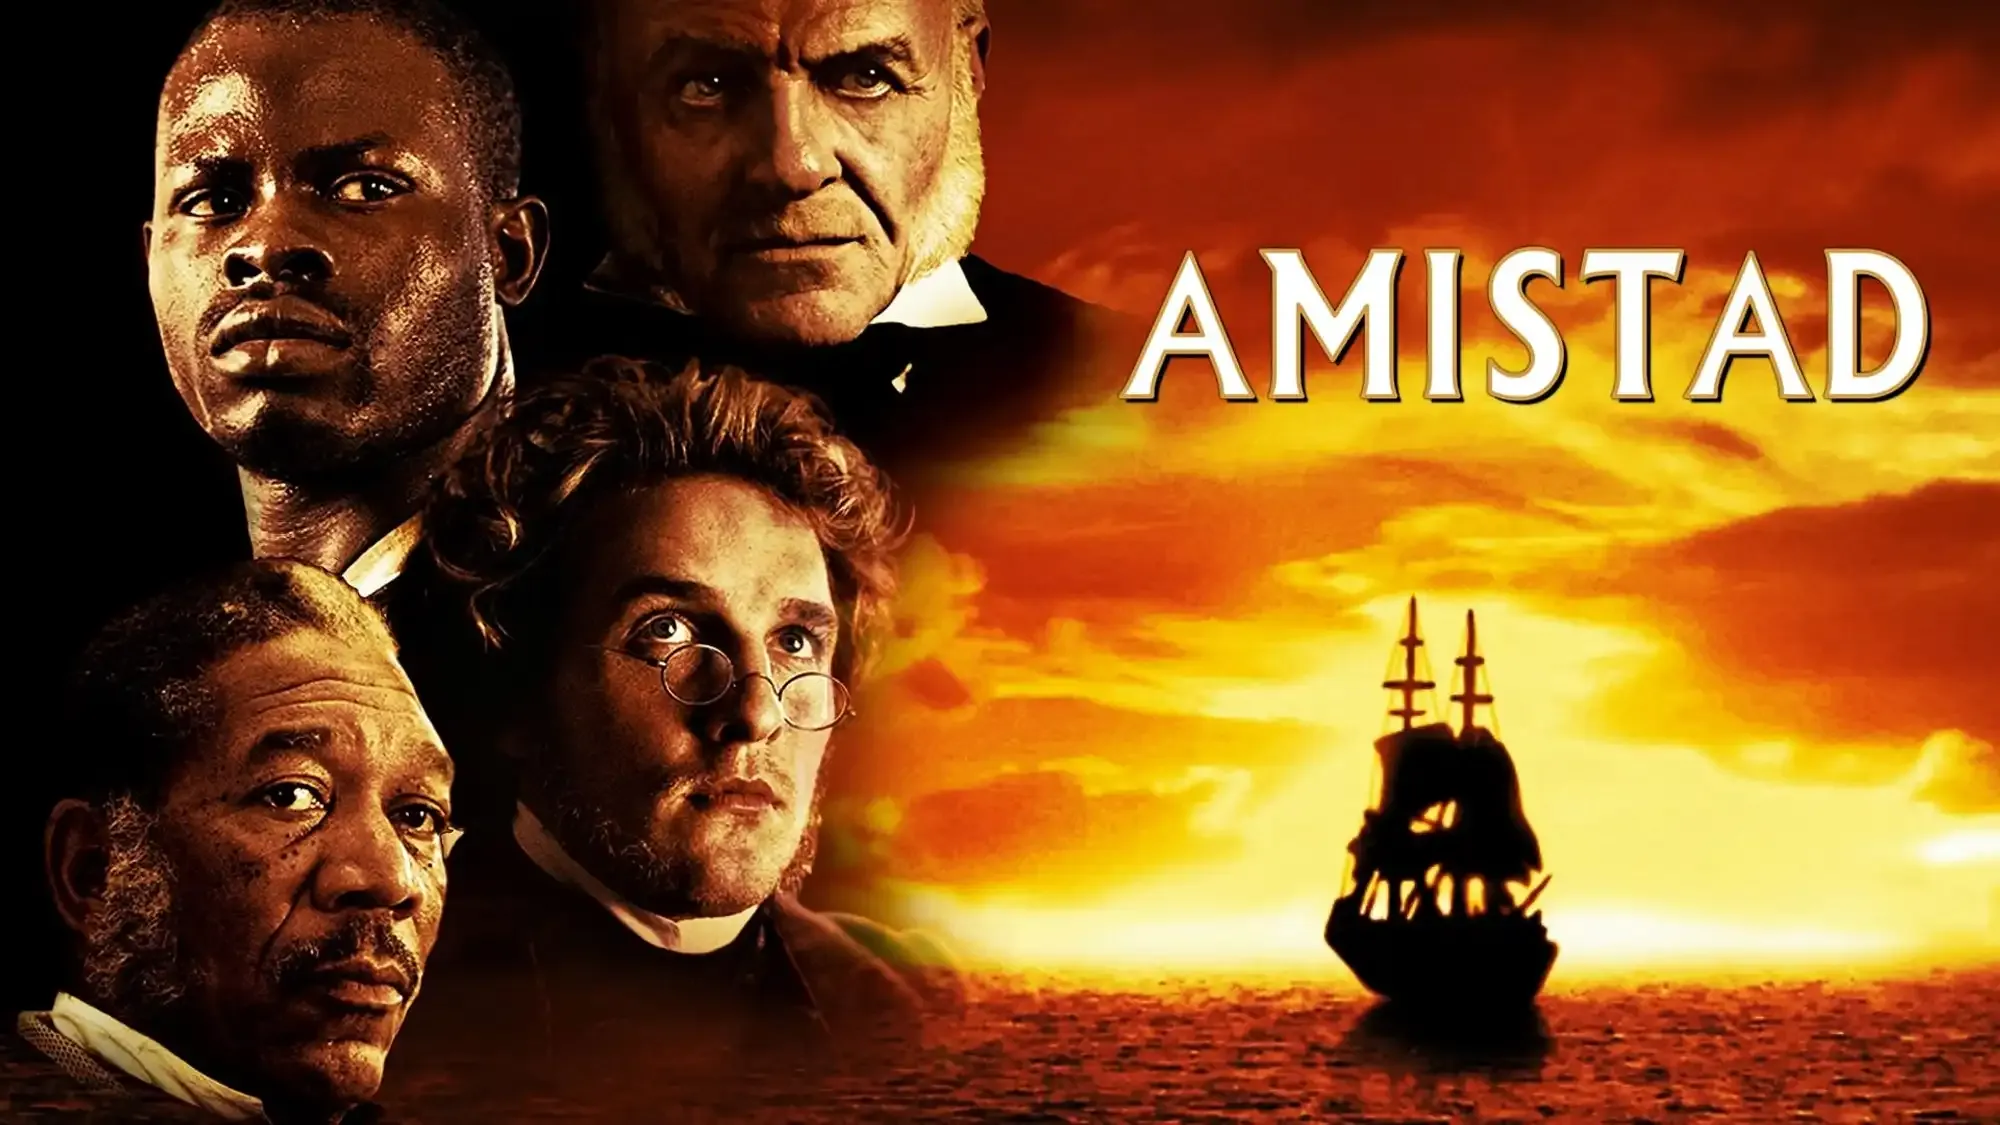 Amistad movie review